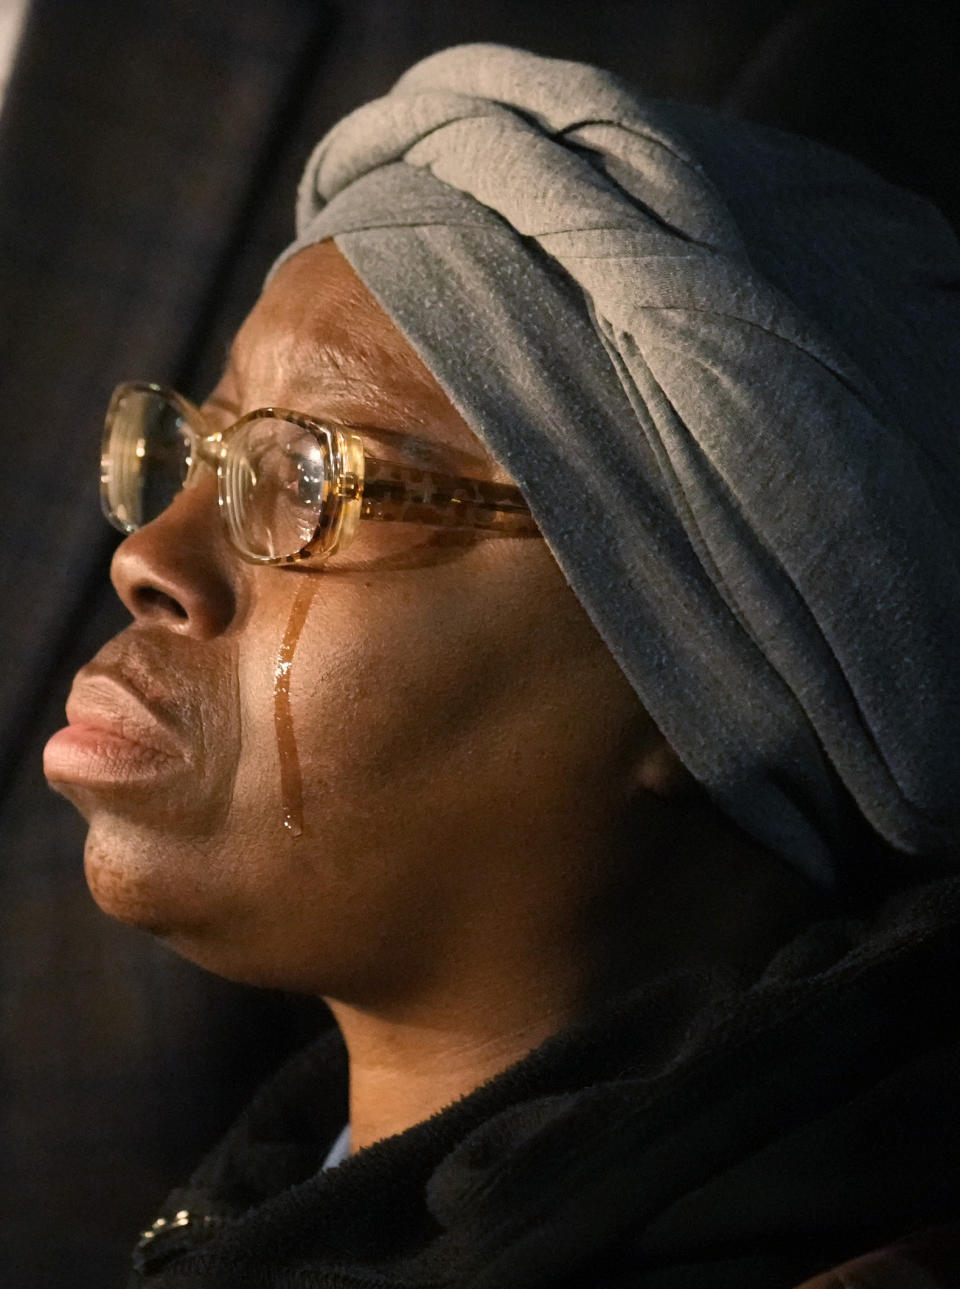 A tear runs down the cheek of Sheneen McClain outside the Adams County Colo., Justice Center, after a verdict was rendered in the killing of her son Elijah McClain, Friday, Dec. 22, 2023, in Brighton, Colo. Two paramedics were convicted in the 2019 killing of McClain, who they injected with an overdose of the sedative ketamine after police put him in a neck hold. (AP Photo/David Zalubowski)